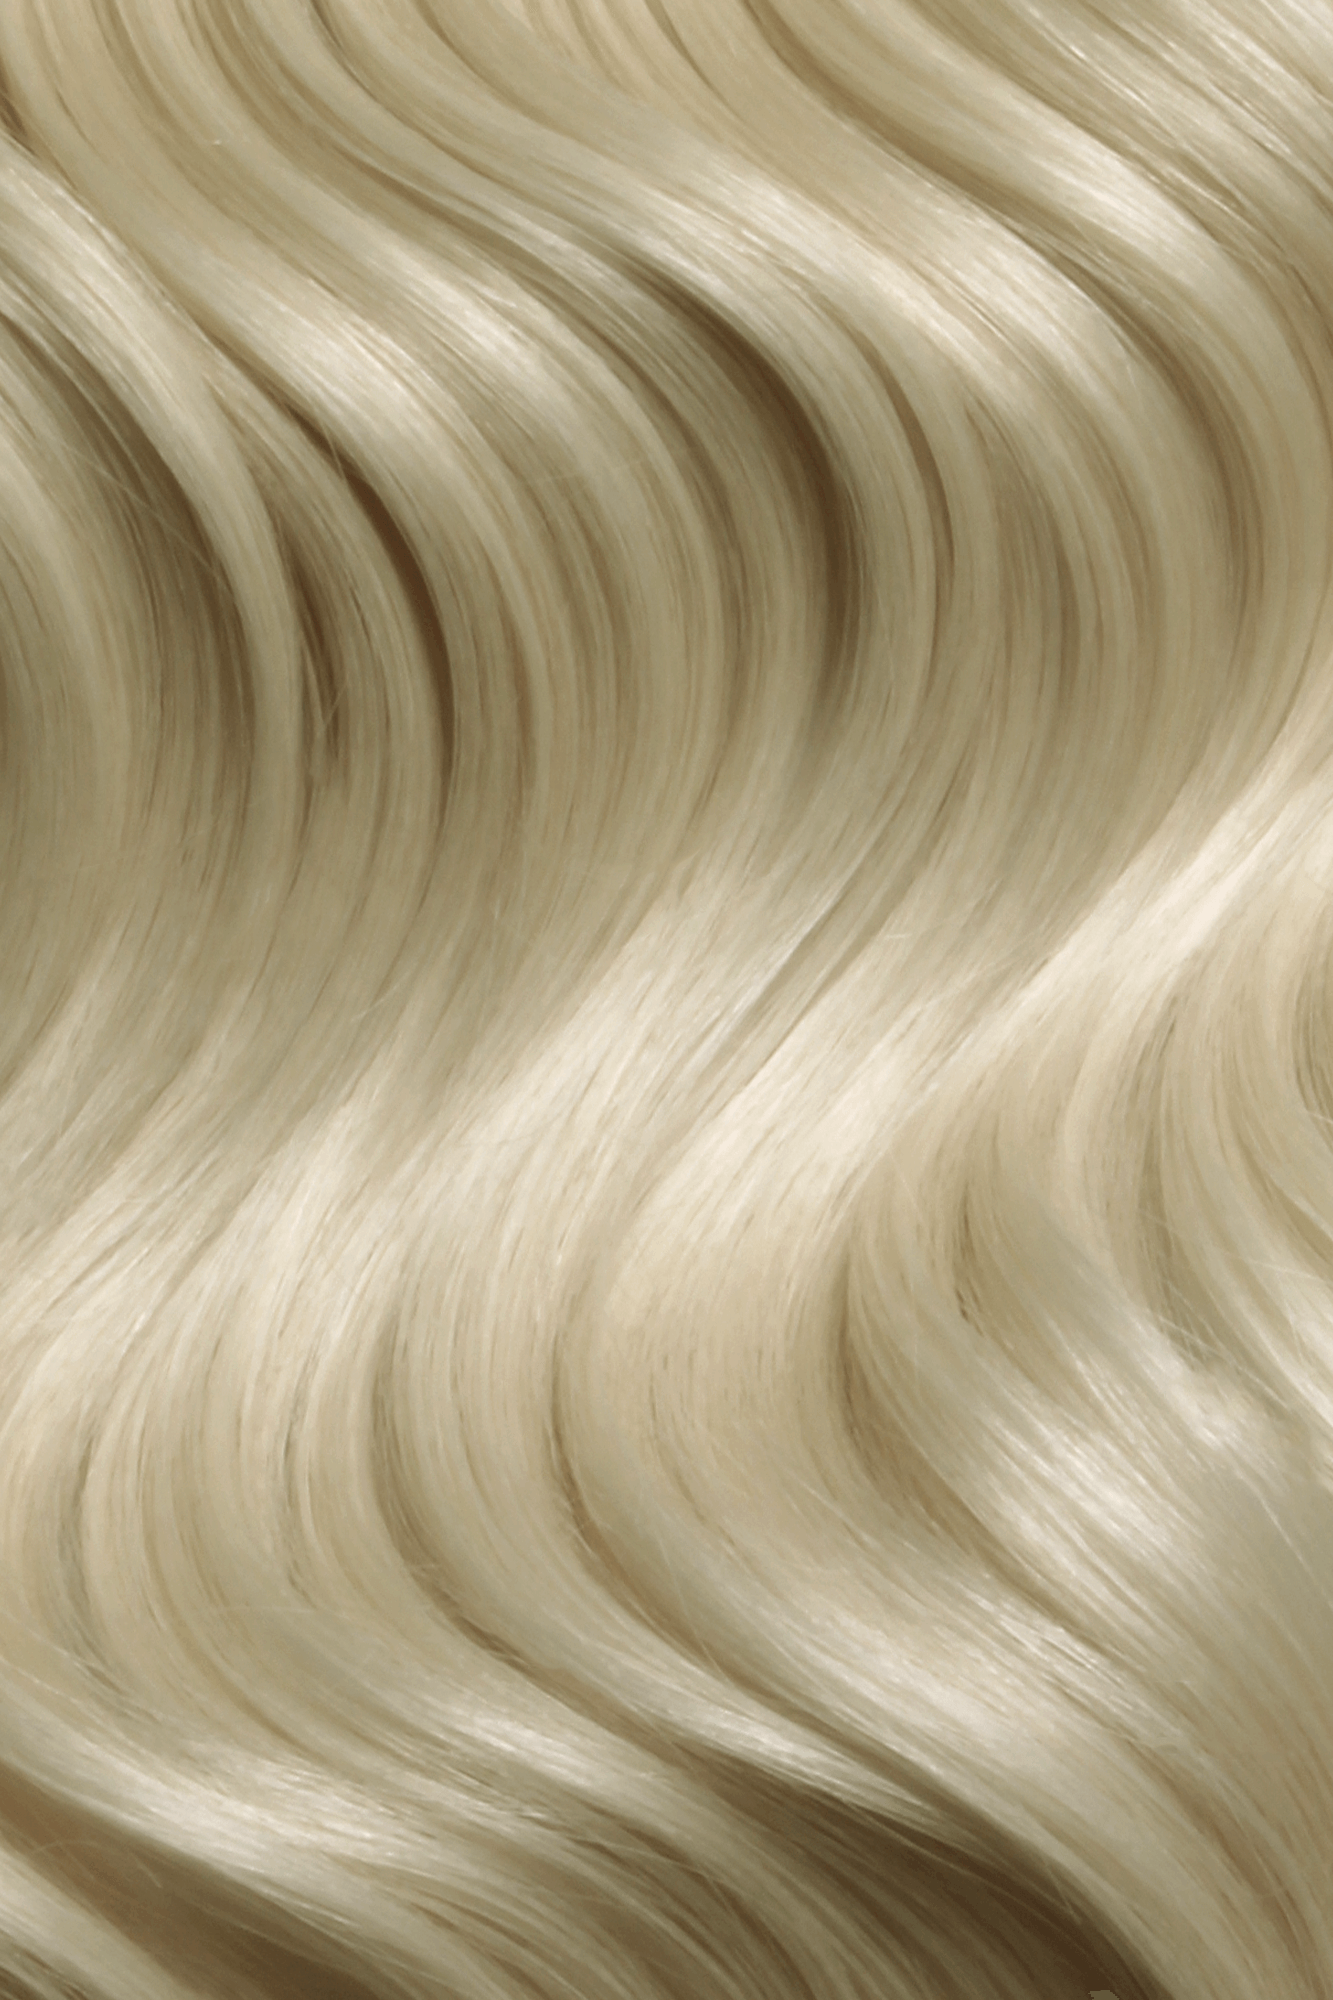 SEAMLESS® Tapes 20 Inches - SWAY Hair Extensions Sandy-Blonde-60 clip-in hair extensions made of 100% Double Drawn, Remy Human Hair. SWAY SEAMLESS® Tapes, 20 inches. Lightweight, flexible, and perfect for any hairstyle.